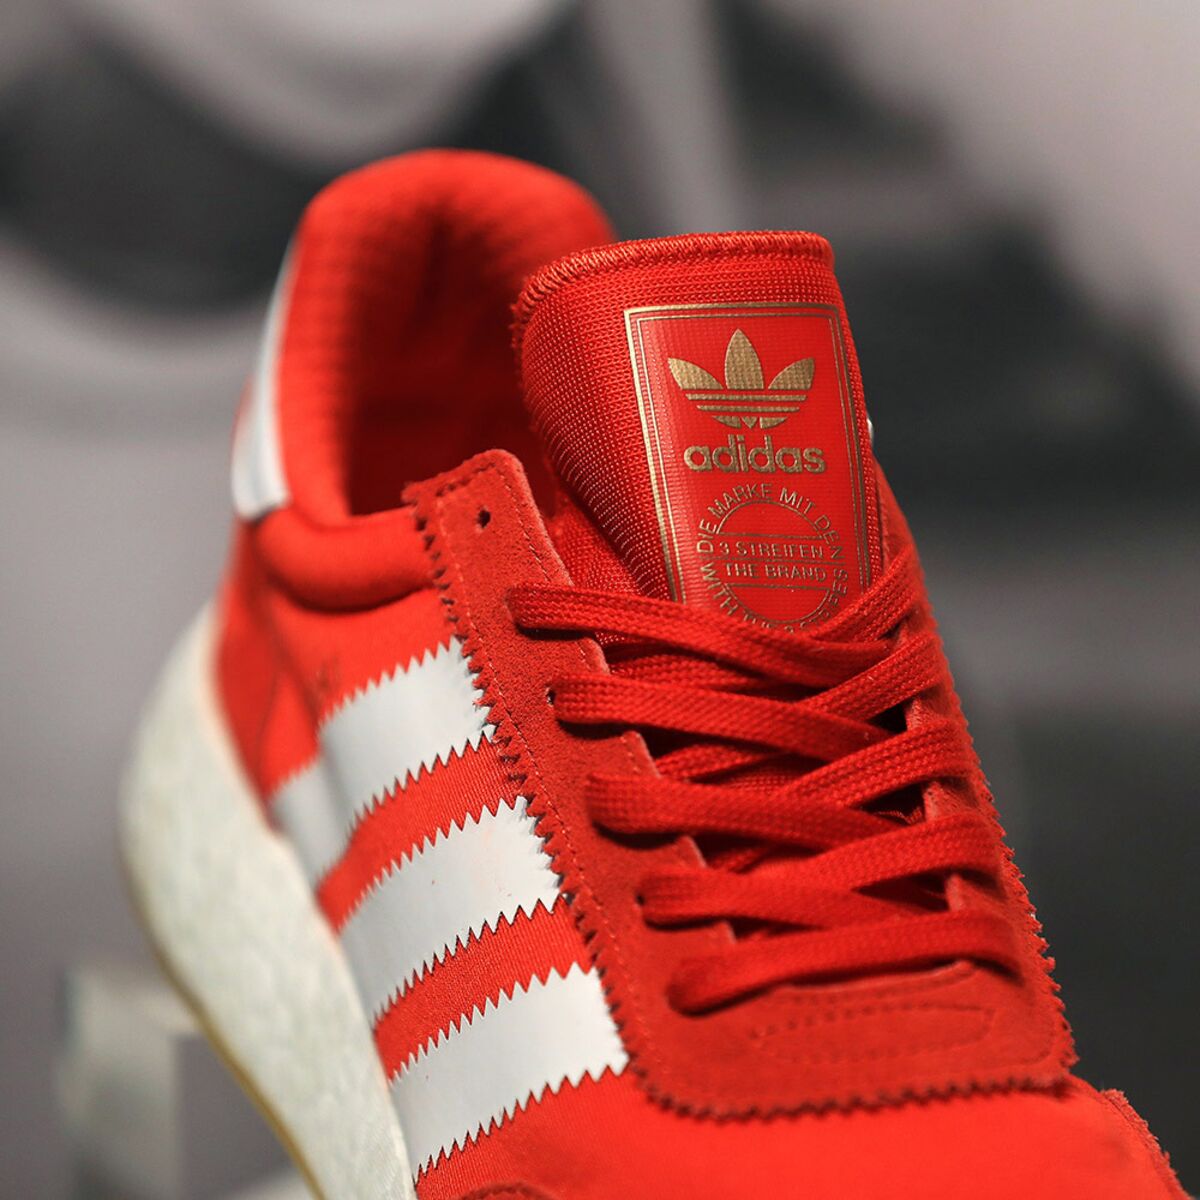 Adidas Lifts Outlook for Sales, Earnings - Bloomberg